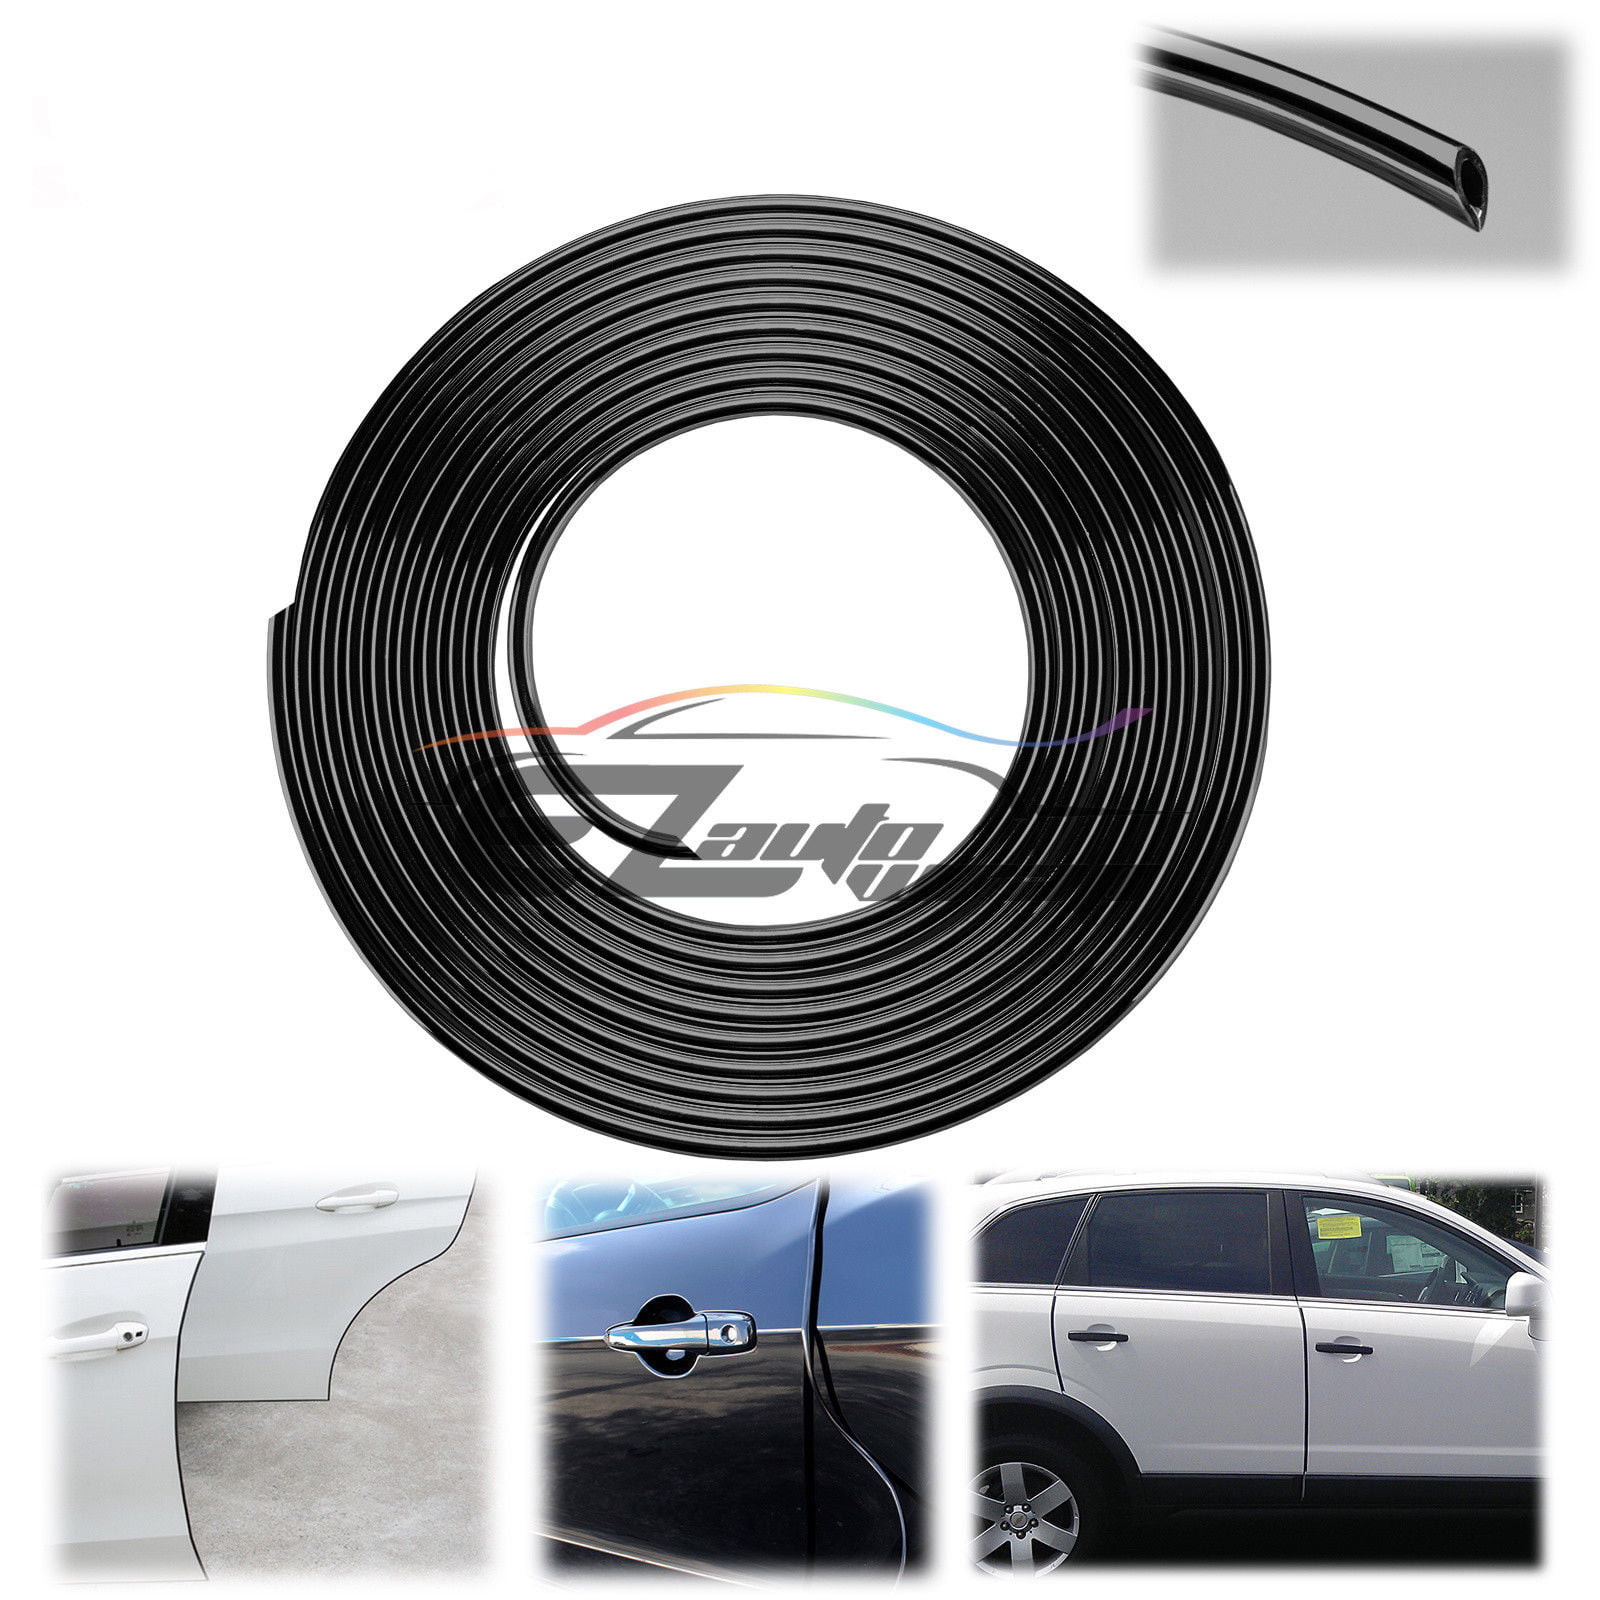 Chrome Door Guard Edge Trim Molding Protector Seal Strip for Ford